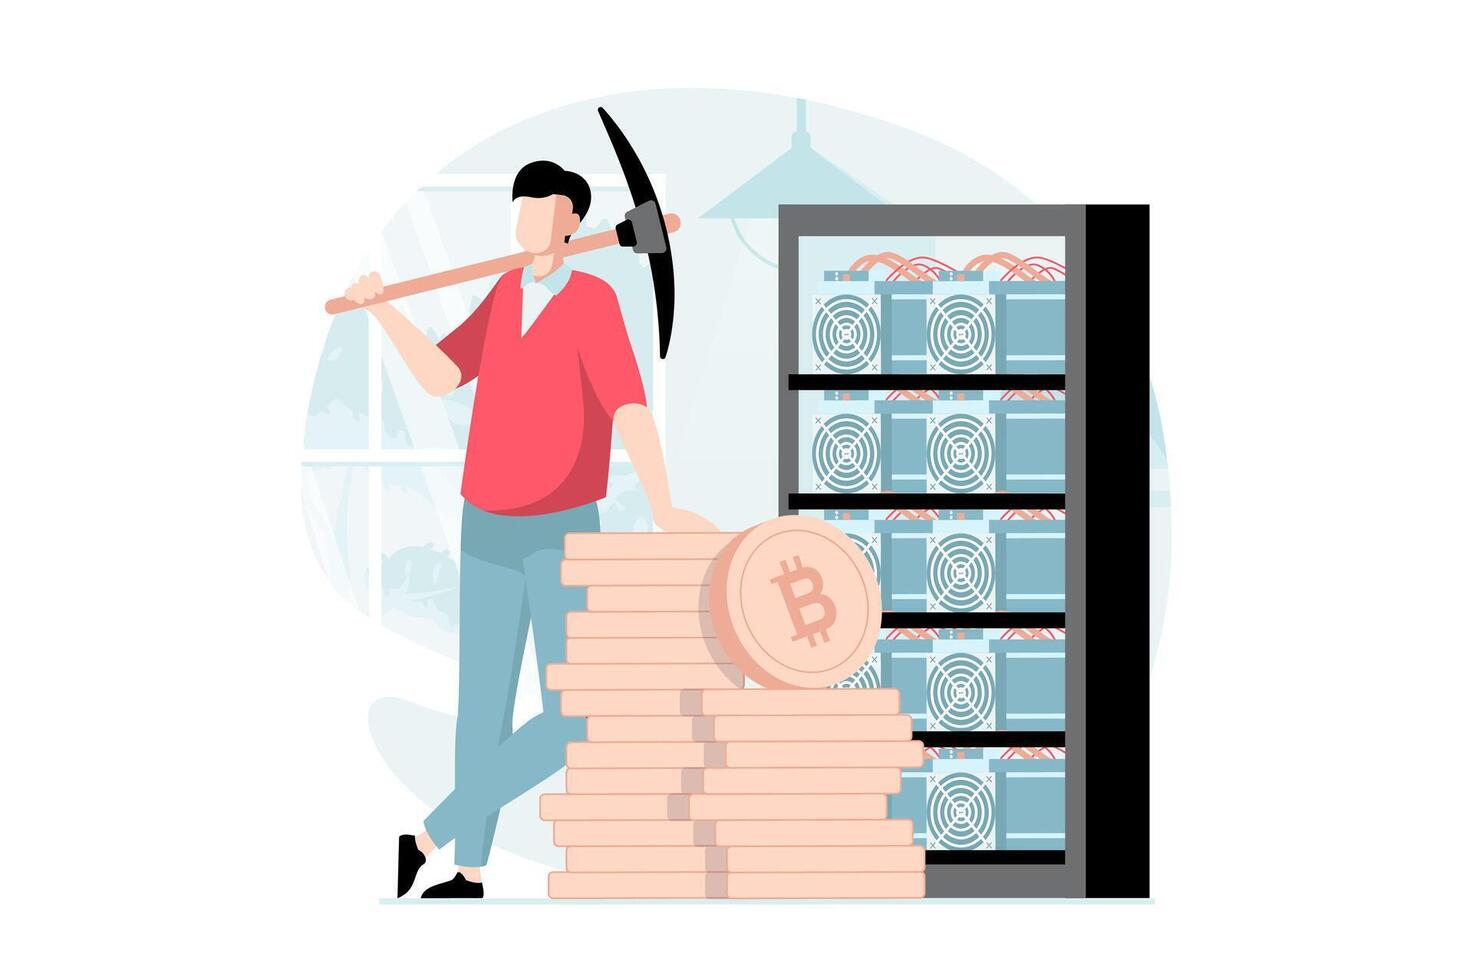 Cryptocurrency mining concept with people scene in flat design. Man with pickaxe stands near stack of bitcoin coins at mining farm hardware. illustration with character situation for web vector